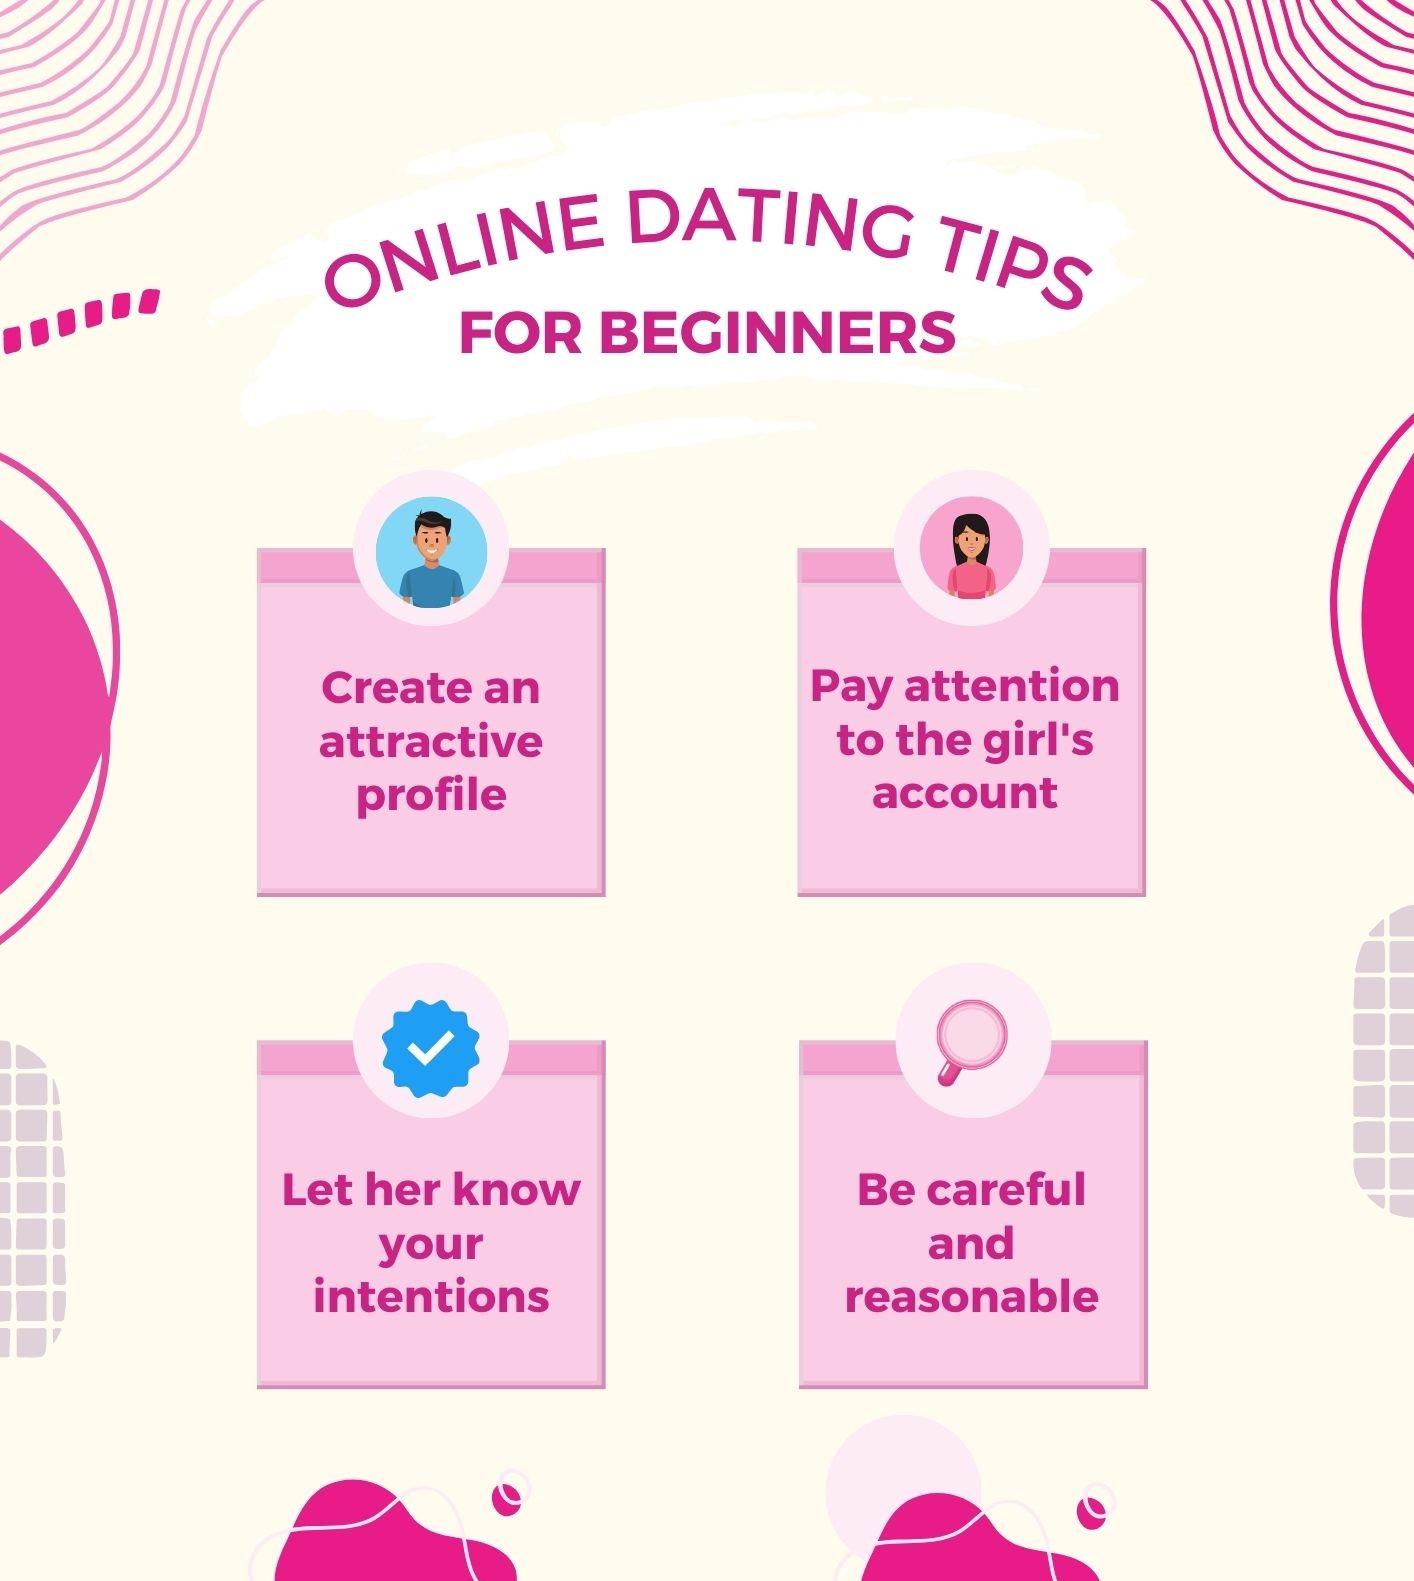 How to Build Relationships With Girls on the Internet? 1